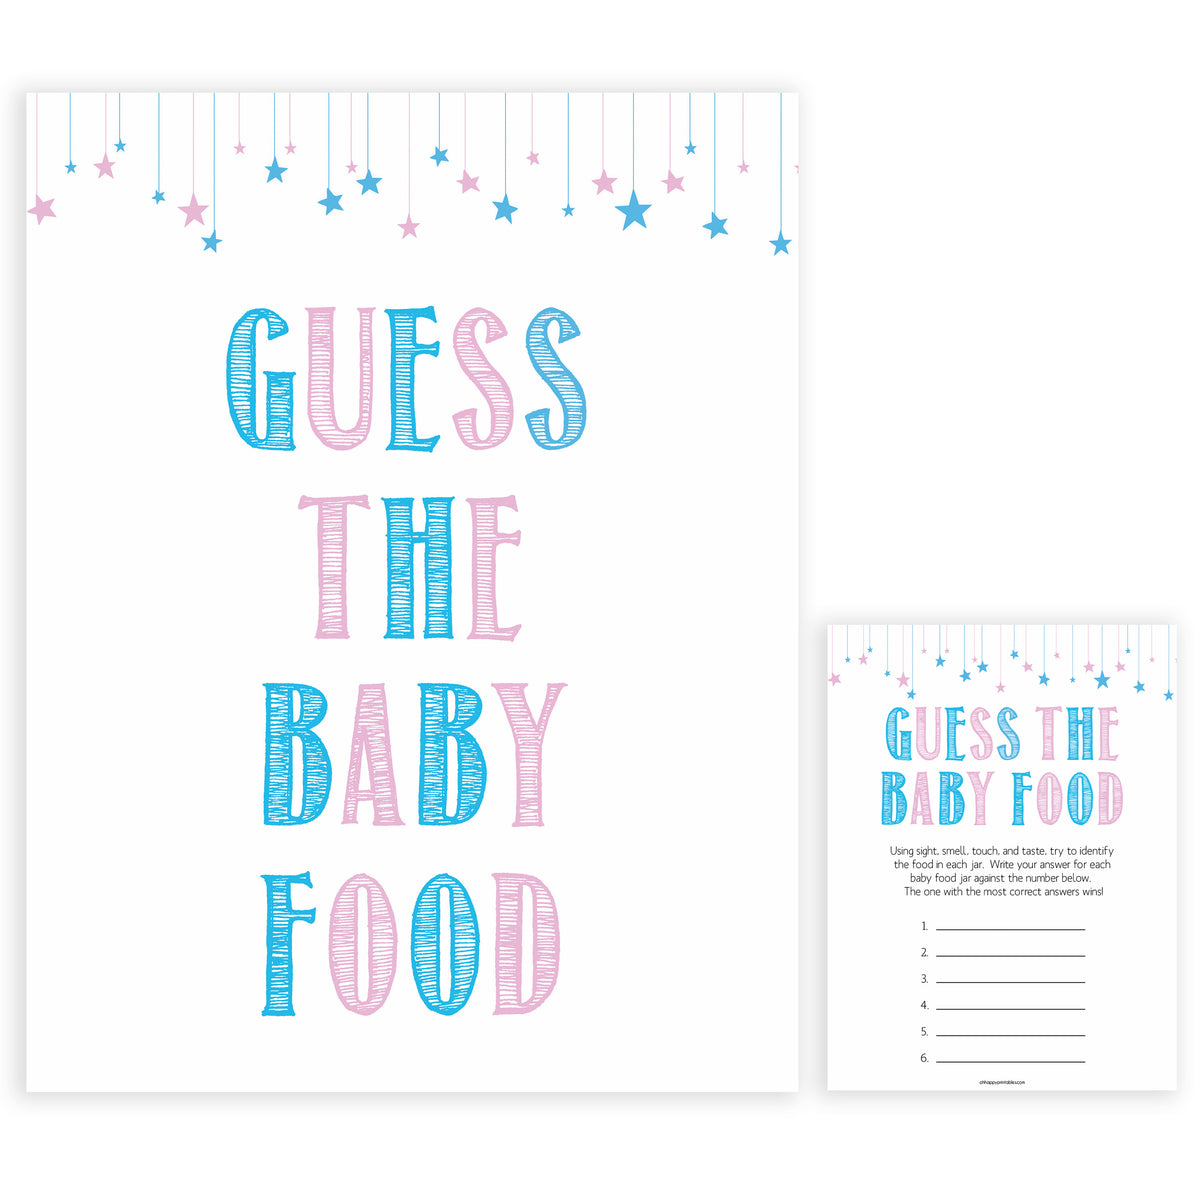 guess-the-baby-food-game-gender-reveal-printable-baby-shower-games